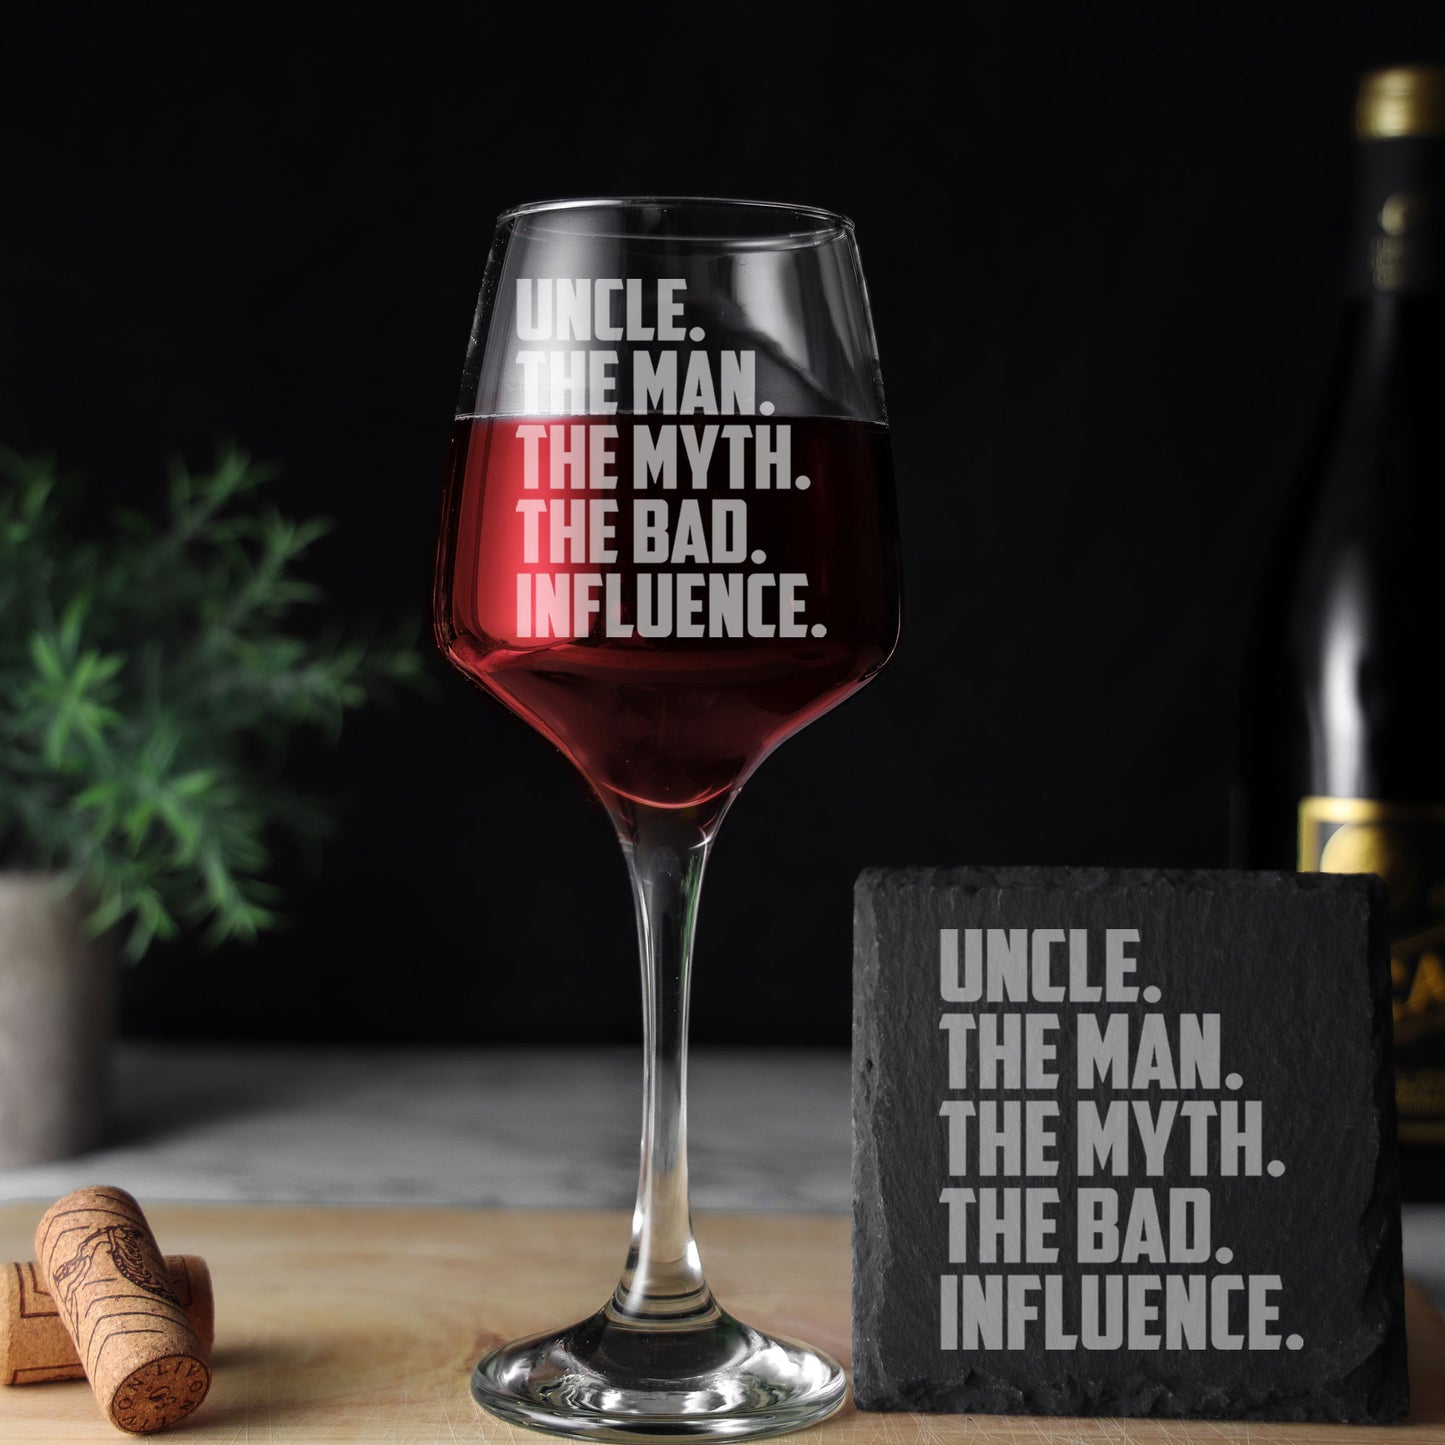 Uncle, The Man, The Myth, The Bad Influence Engraved Wine Glass and/or Coaster Set  - Always Looking Good - Glass & Square Coaster Set  